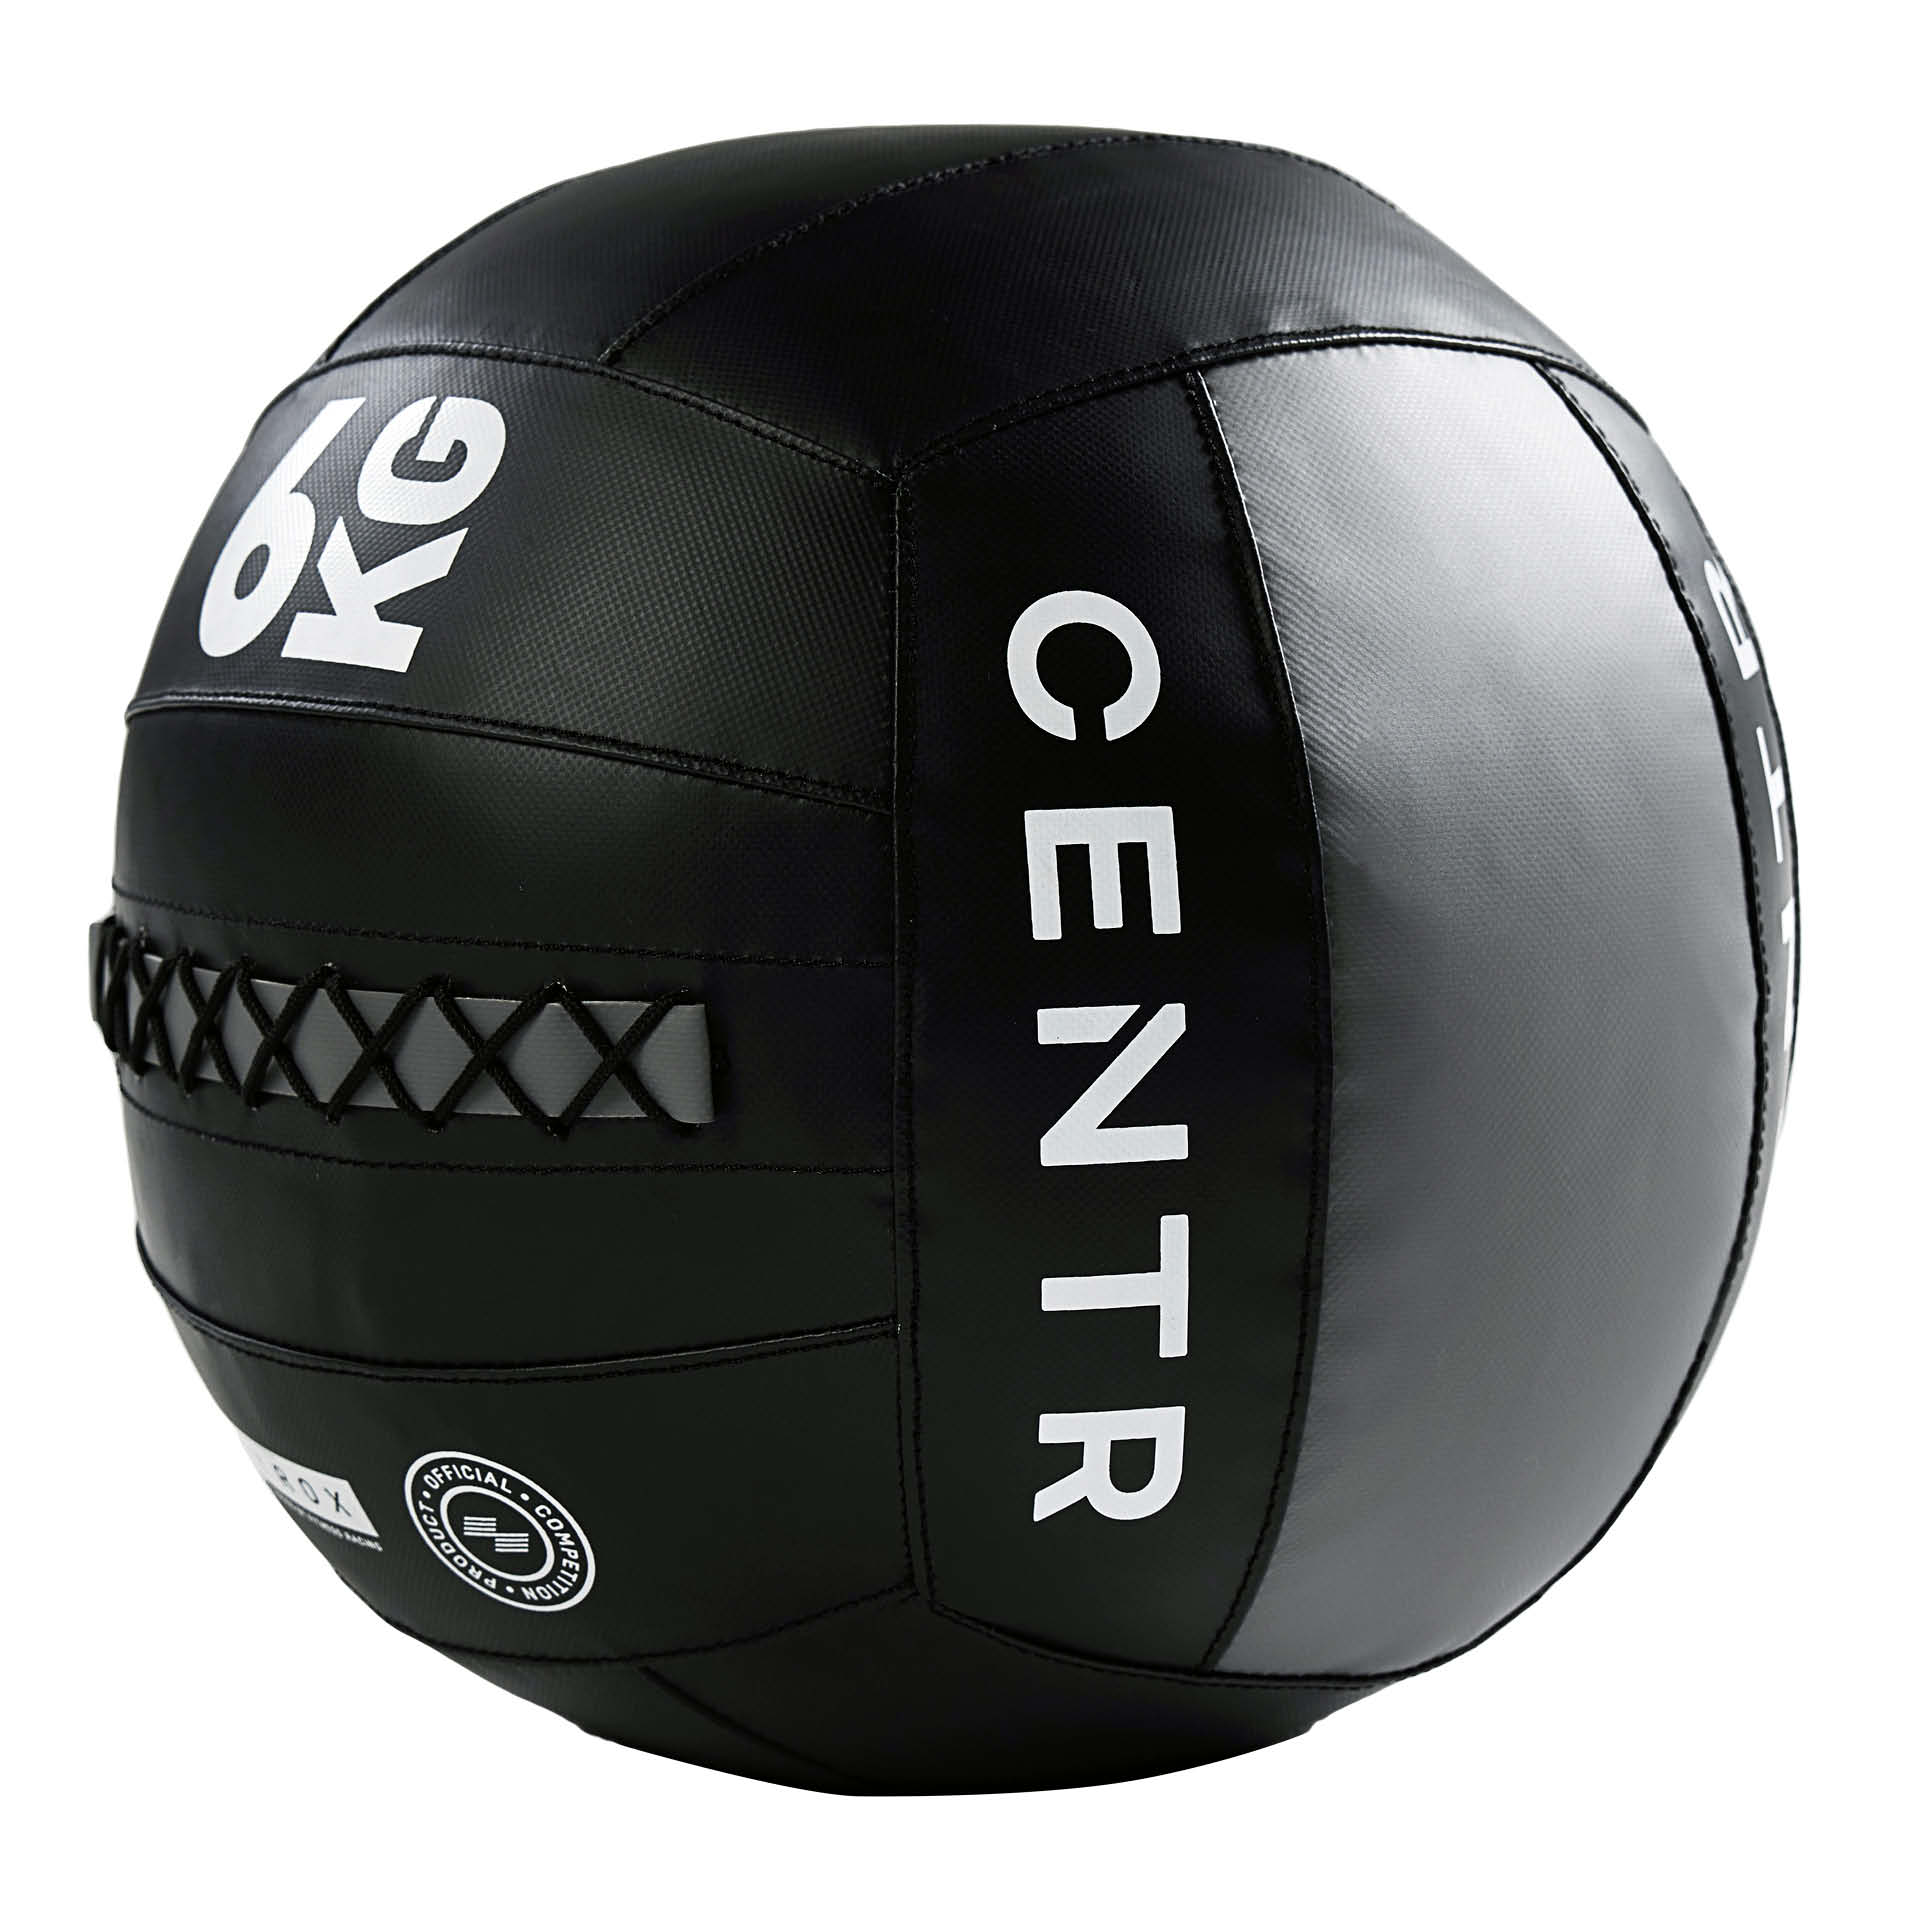 CENTR x HYROX Competition Wall Ball - 6 kg